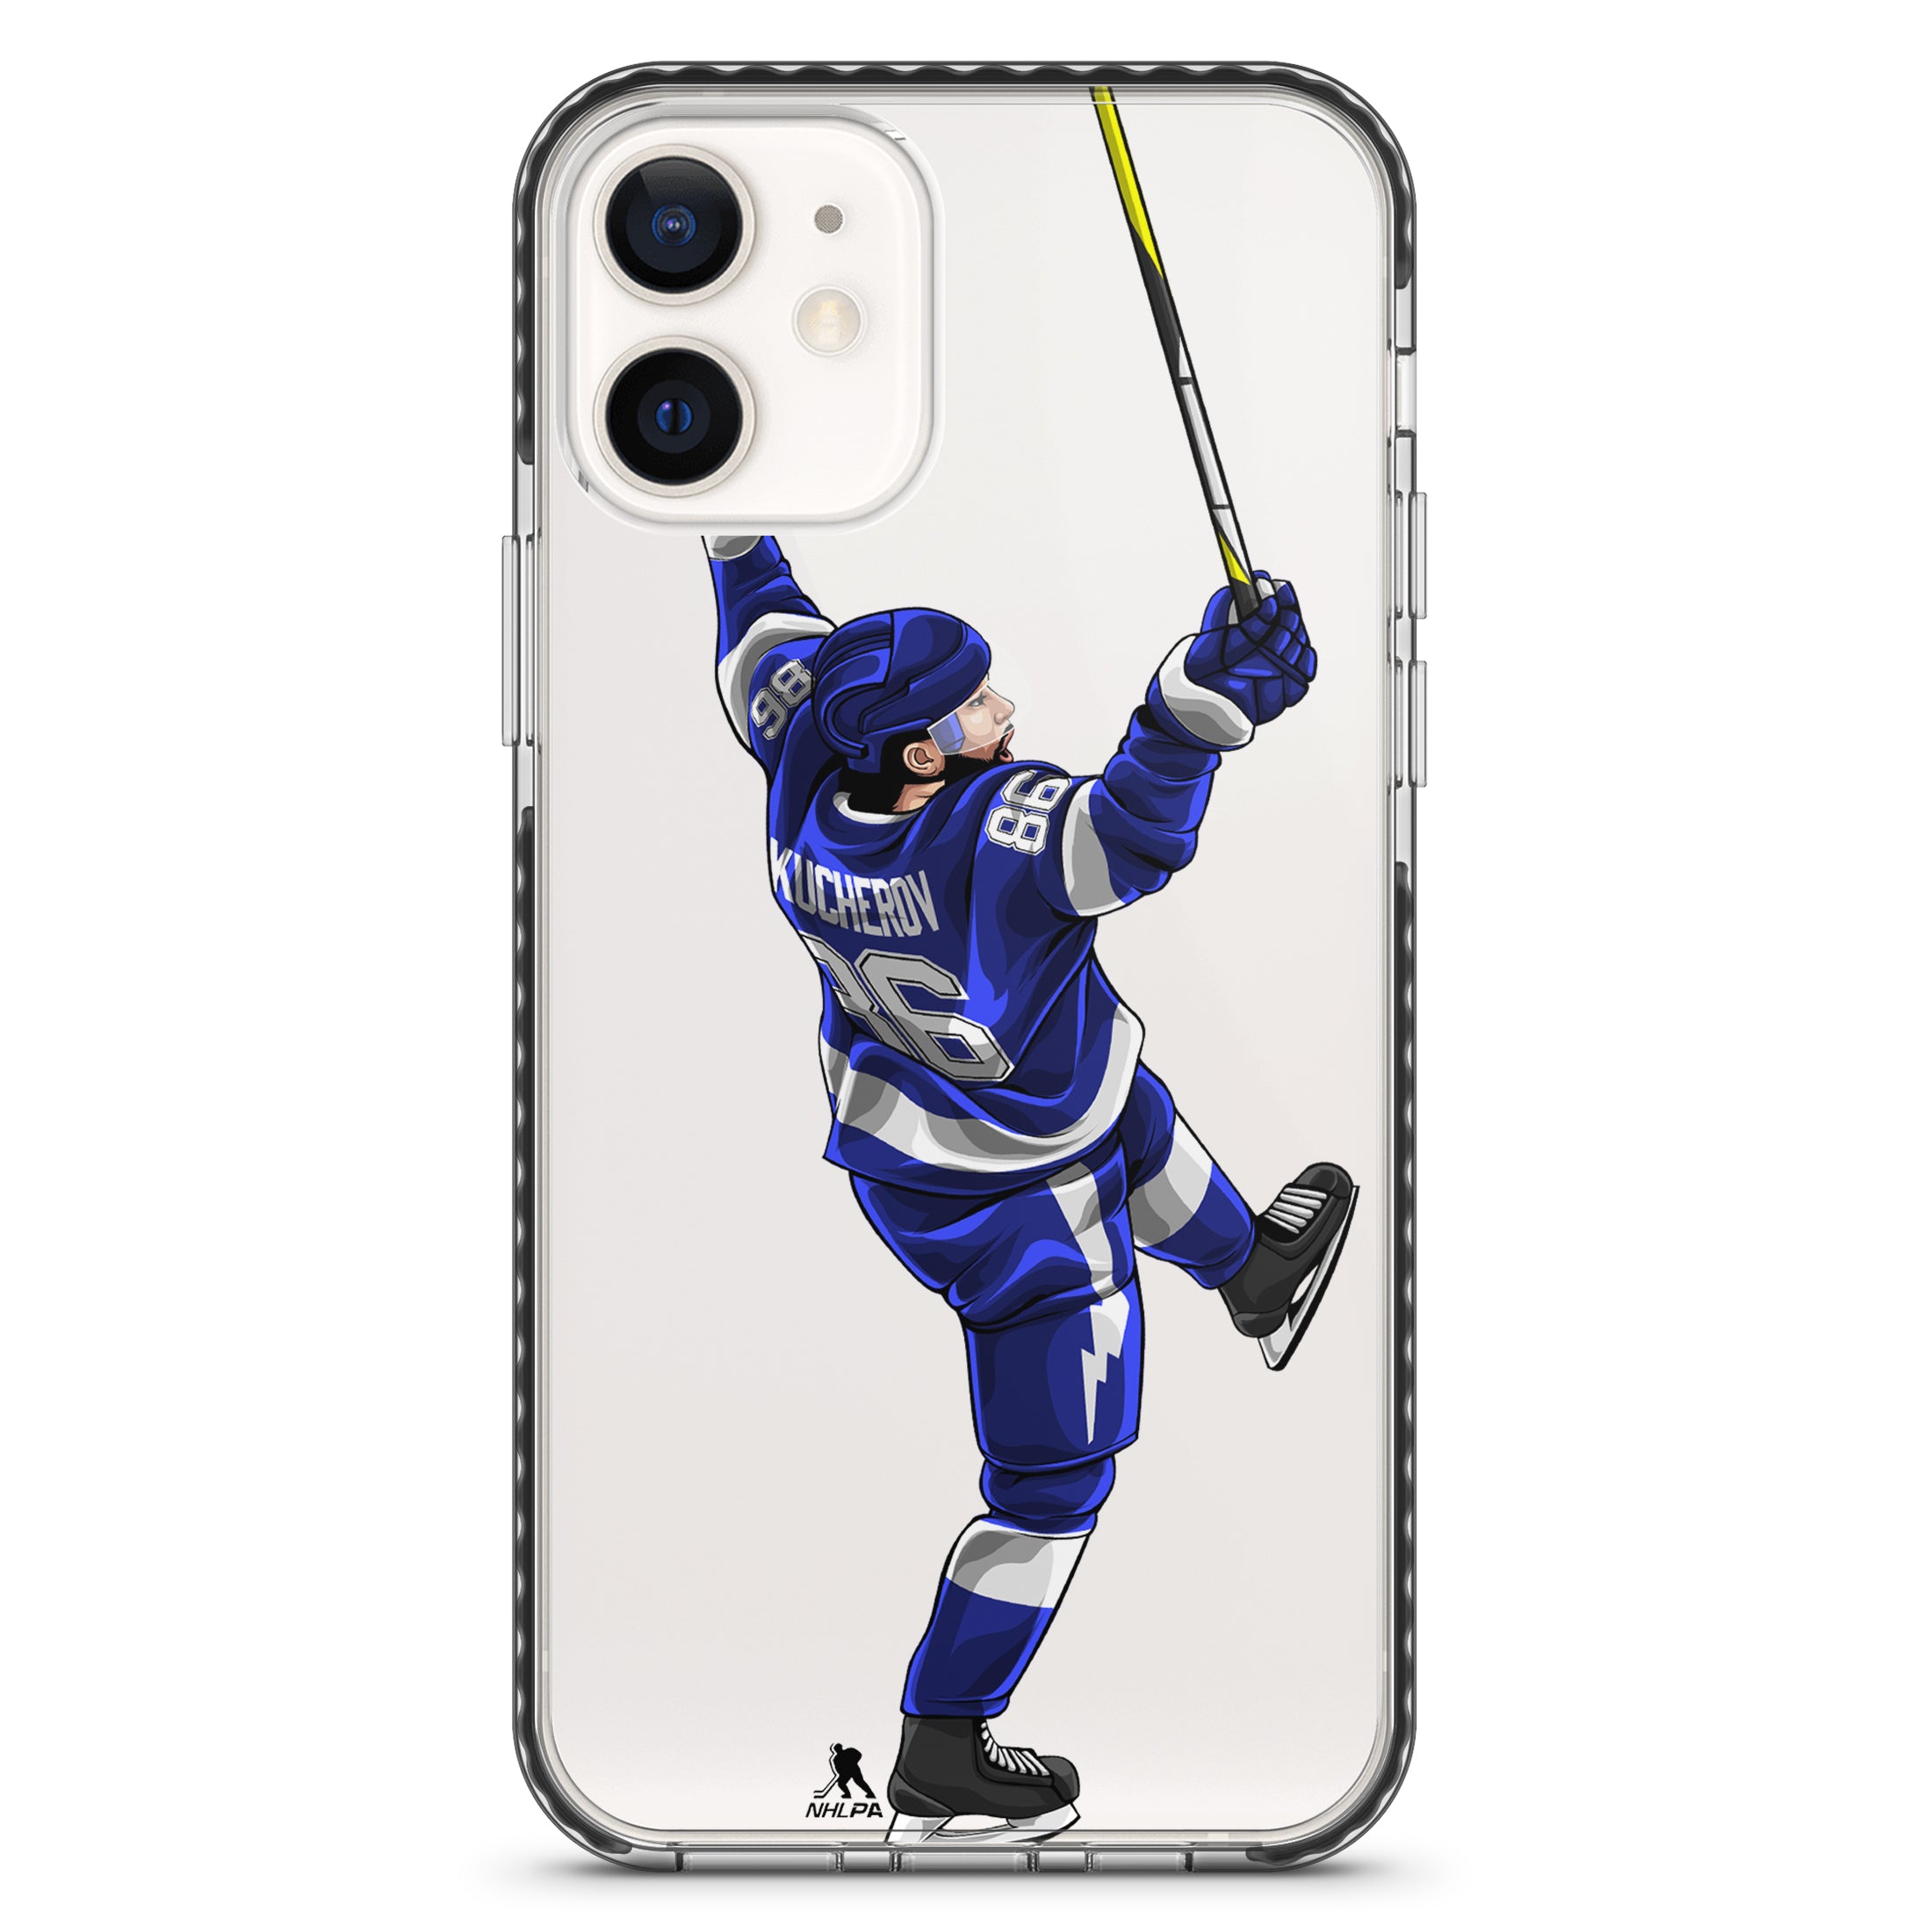 CHARGEUR IPHONE & PRISE SECTEUR – HockeyCase